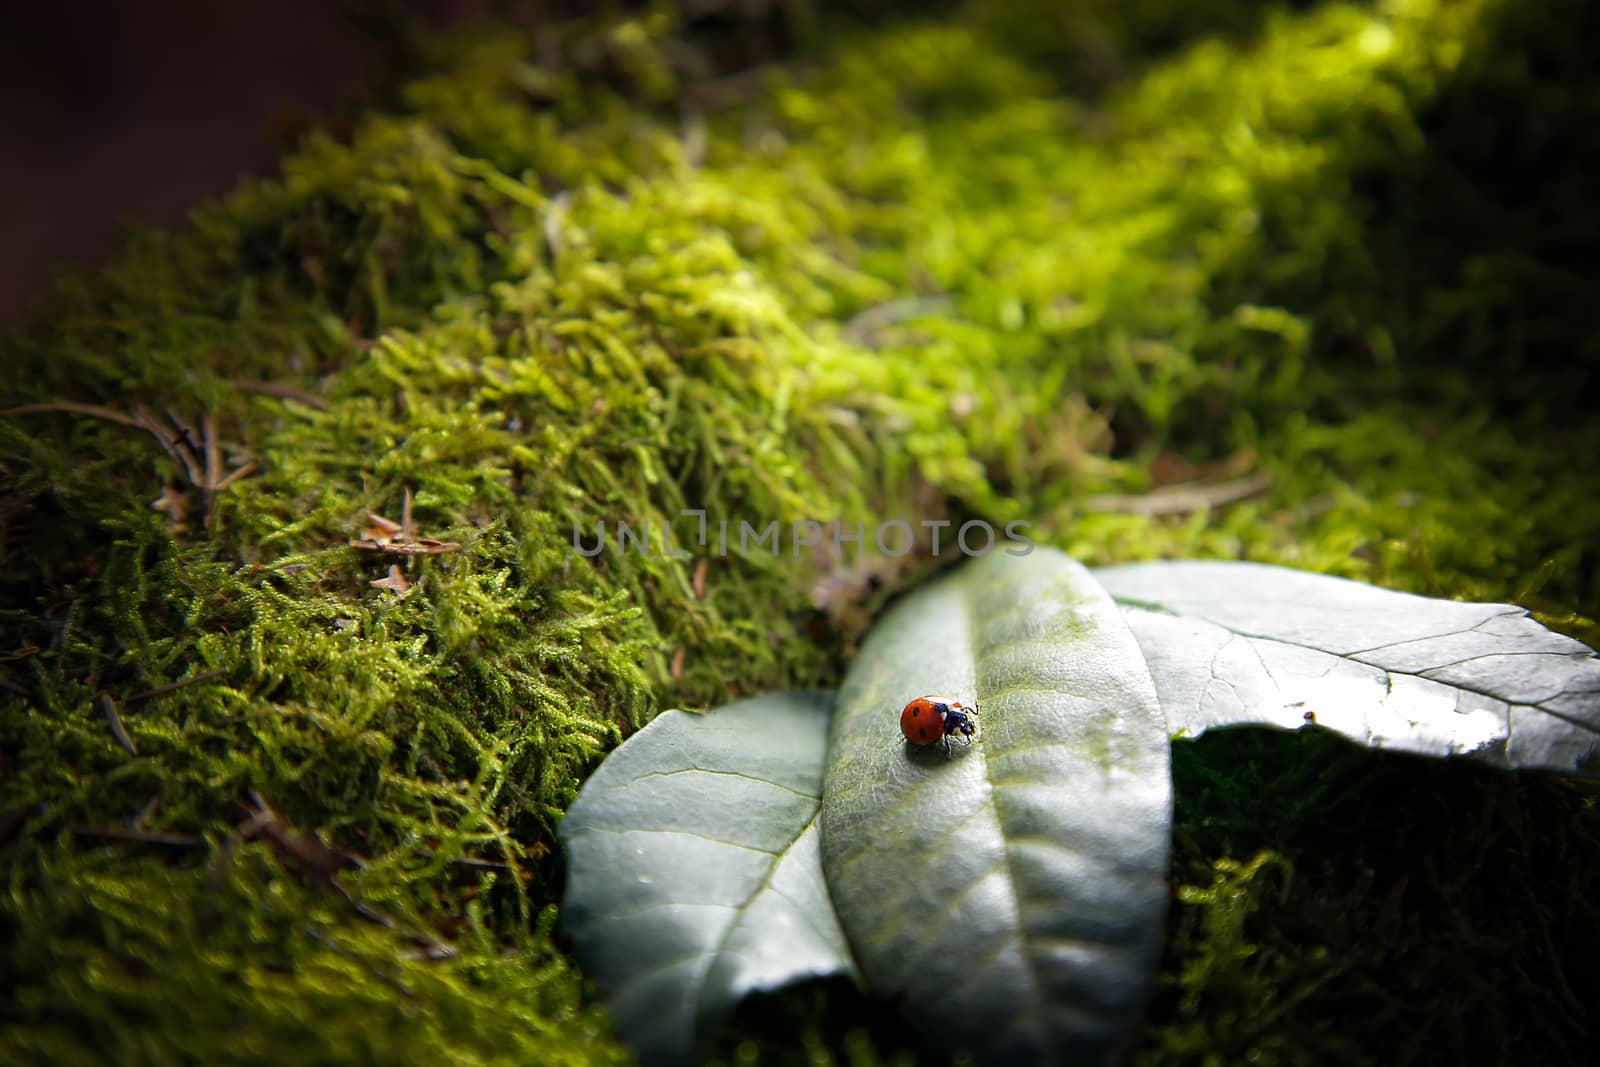 Insect ladybug sitting on a leaf on a stump covered with green moss.Background. by Mastak80